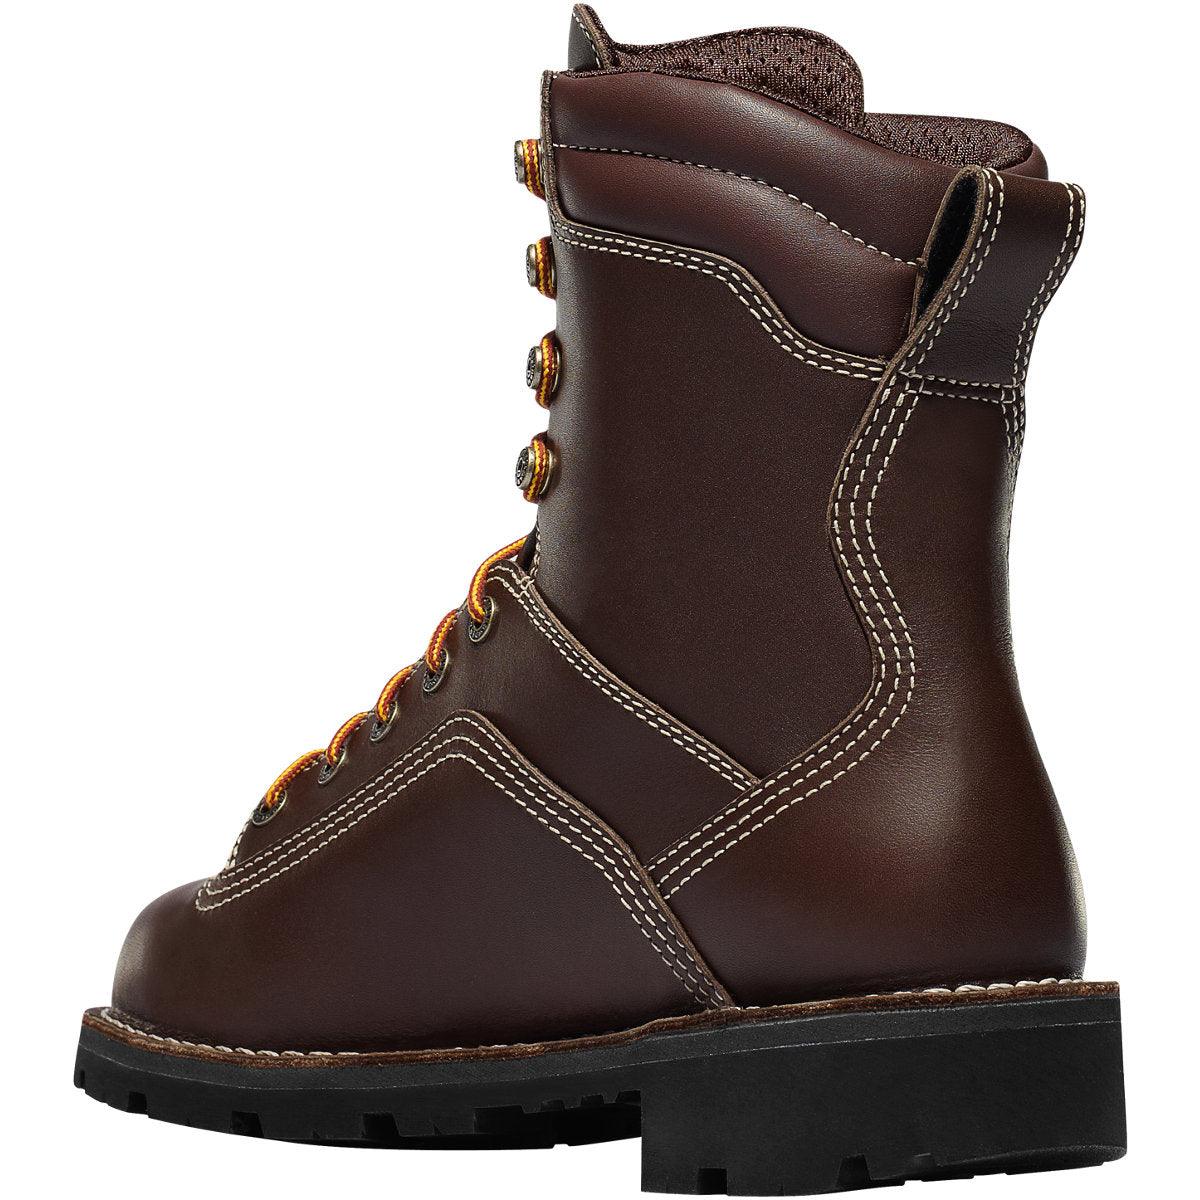 Men's Quarry USA - Alloy Toe - Brown - Purpose-Built / Home of the Trades